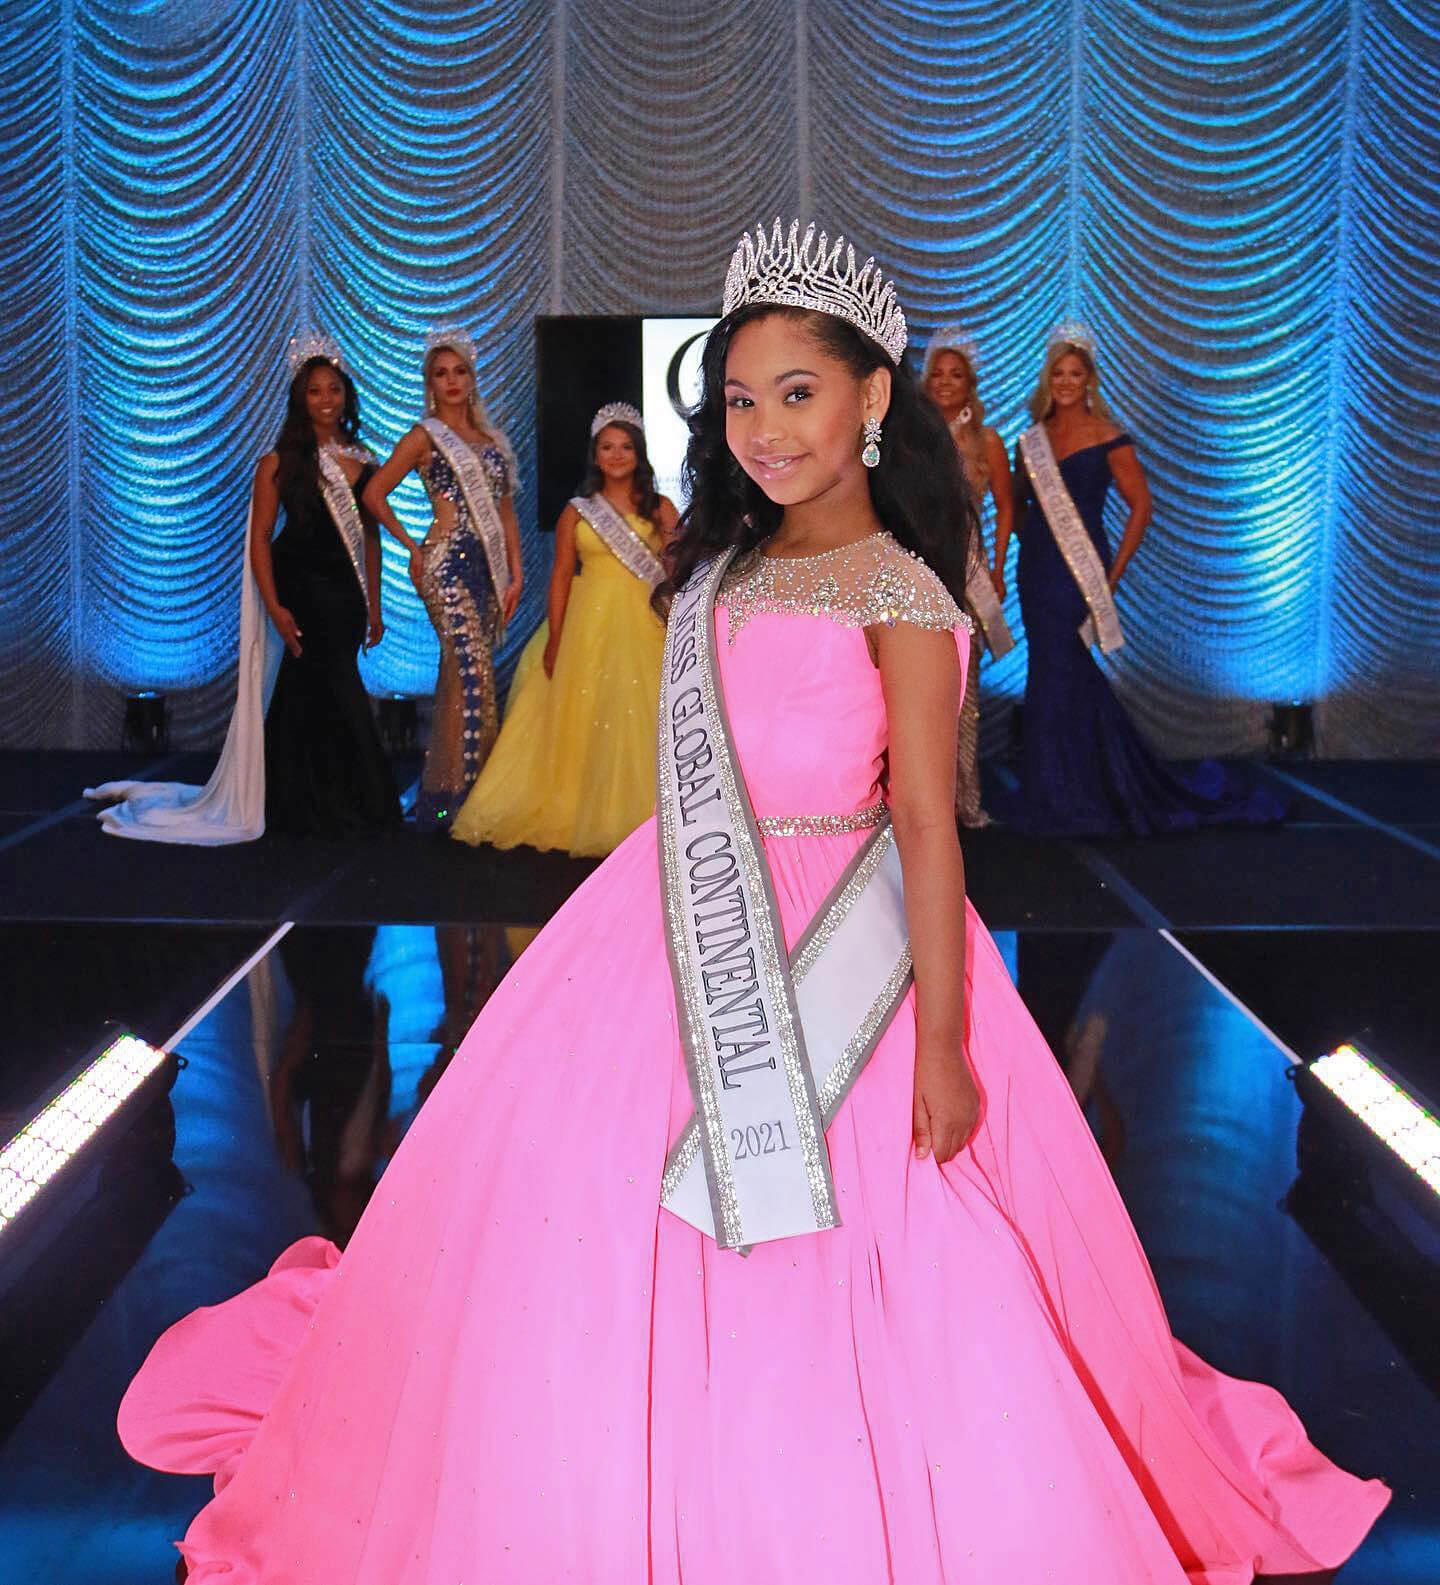 Madison Blaize crowned Little Miss U.S. Global Continental Caribbean Life